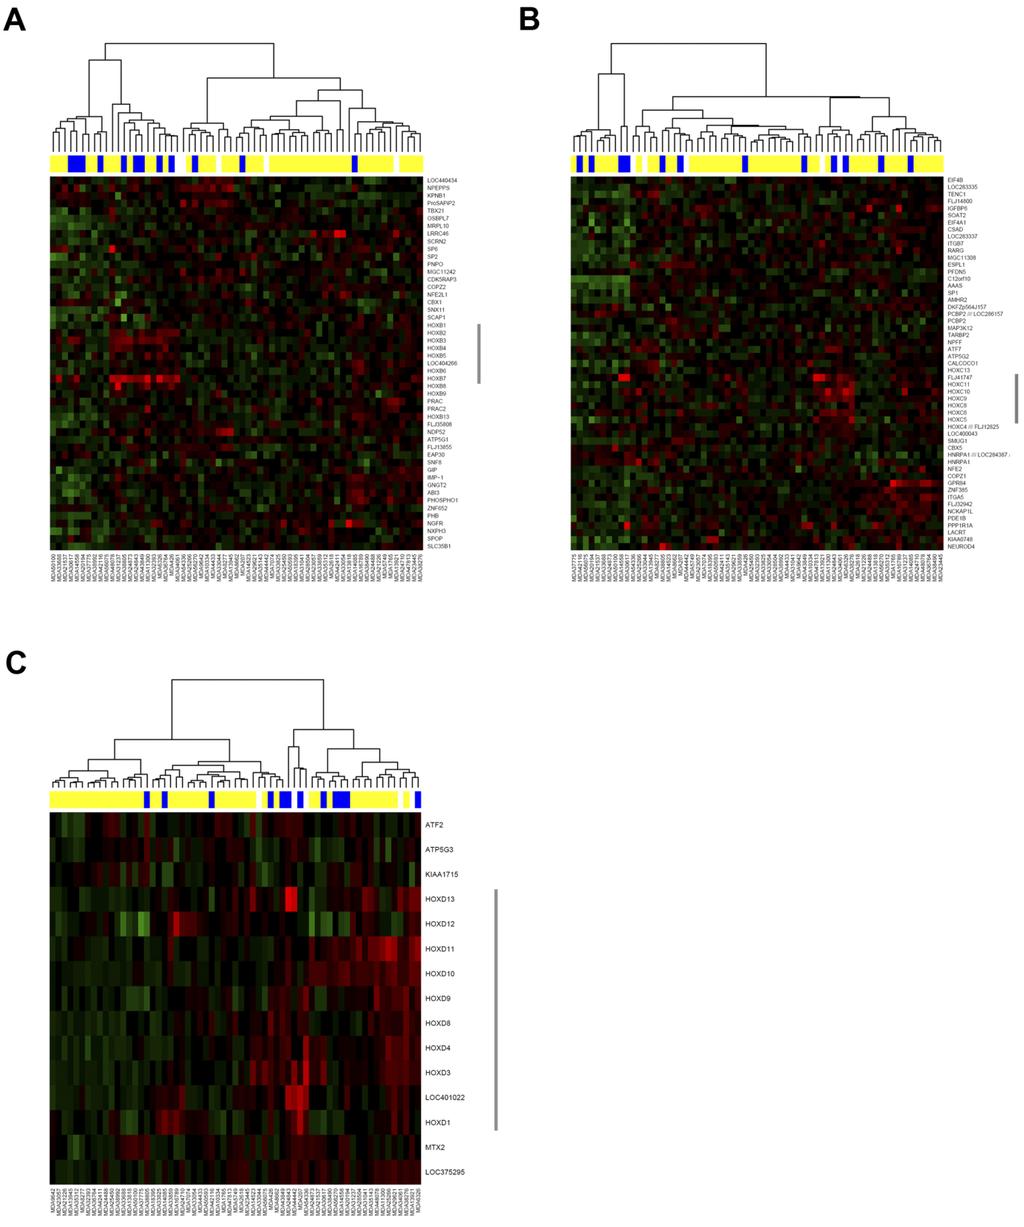 Supplementary Figure S3. HOXB, HOXC, and HOXD gene clusters demonstrate chromosomal domains of transcriptional activation in the MDA tumor set.